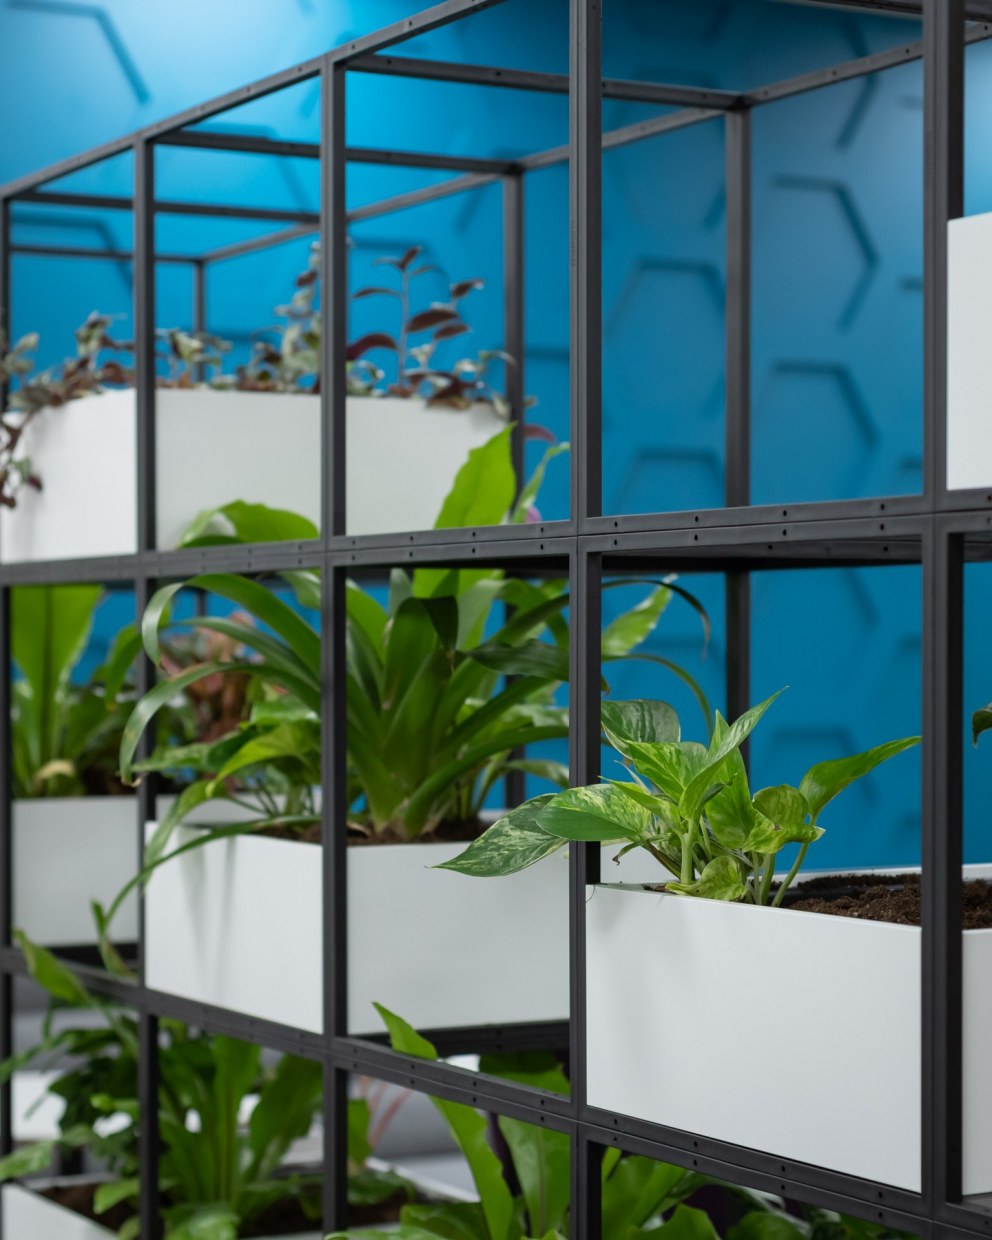 Rethink Events - Workplace Design | Detail - planted shelving screen | Interior Designers